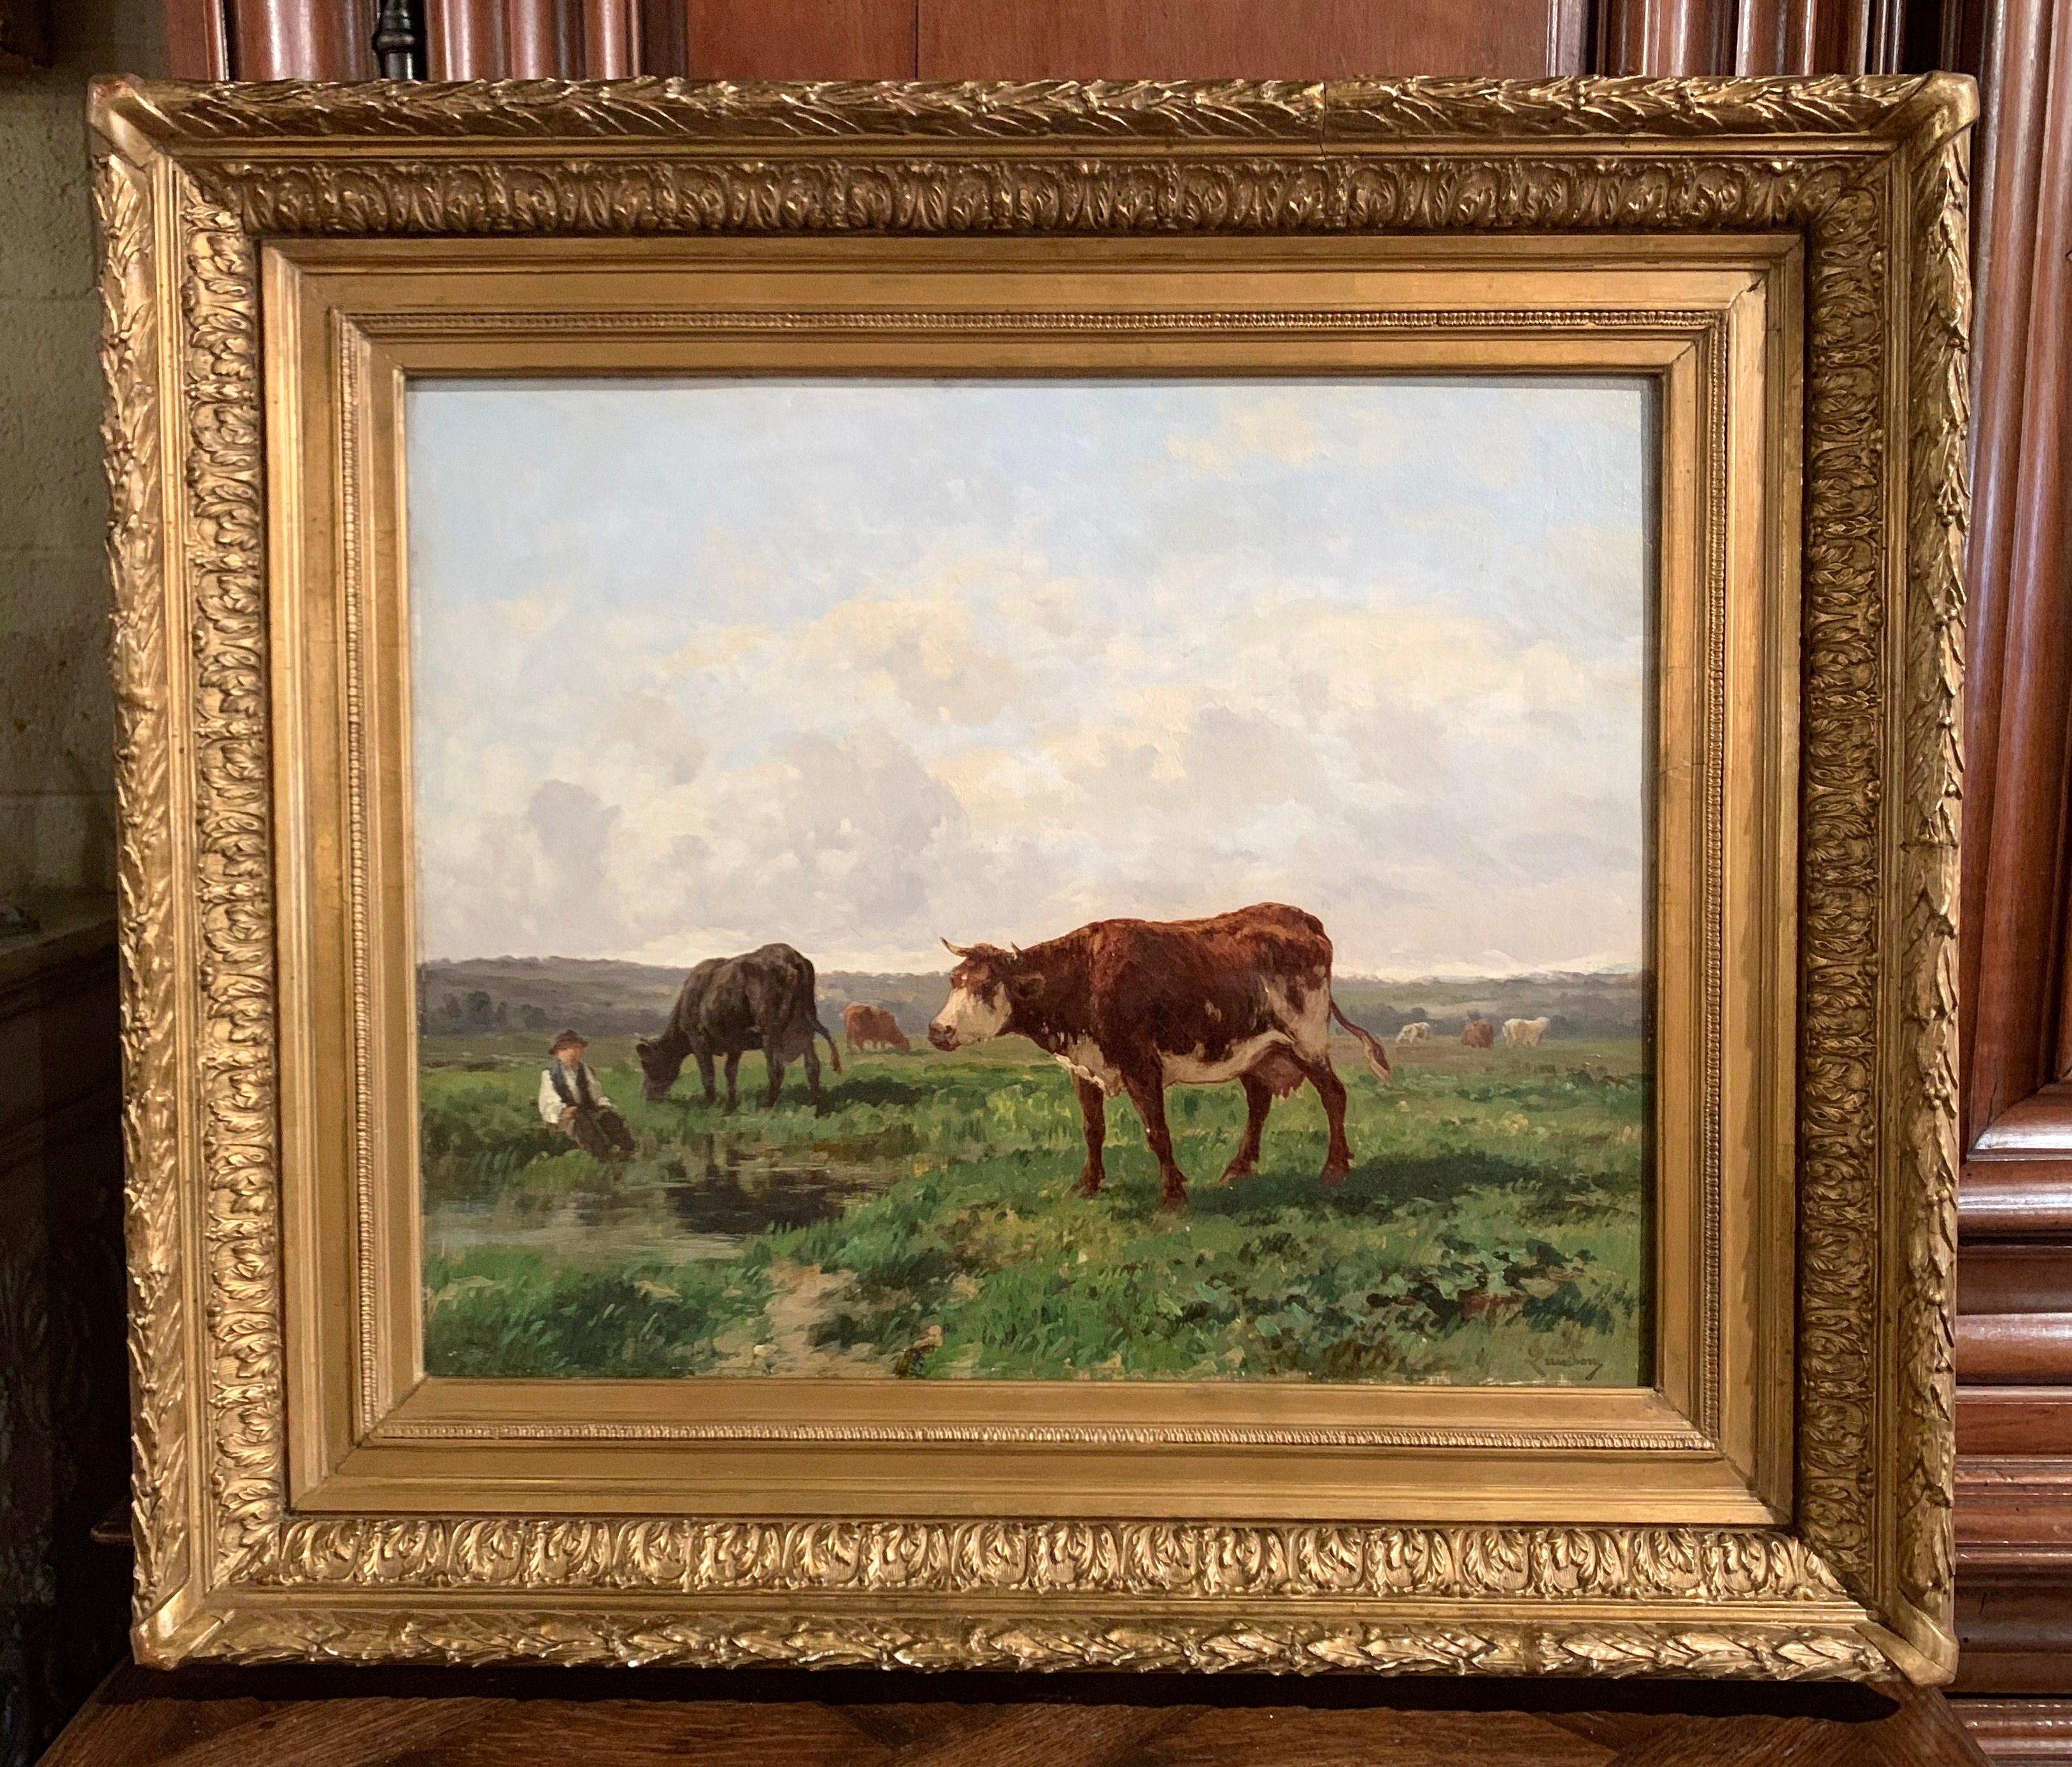 Canvas 19th Century French Cows Oil Painting in Carved Gilt Frame Signed C. Quinton